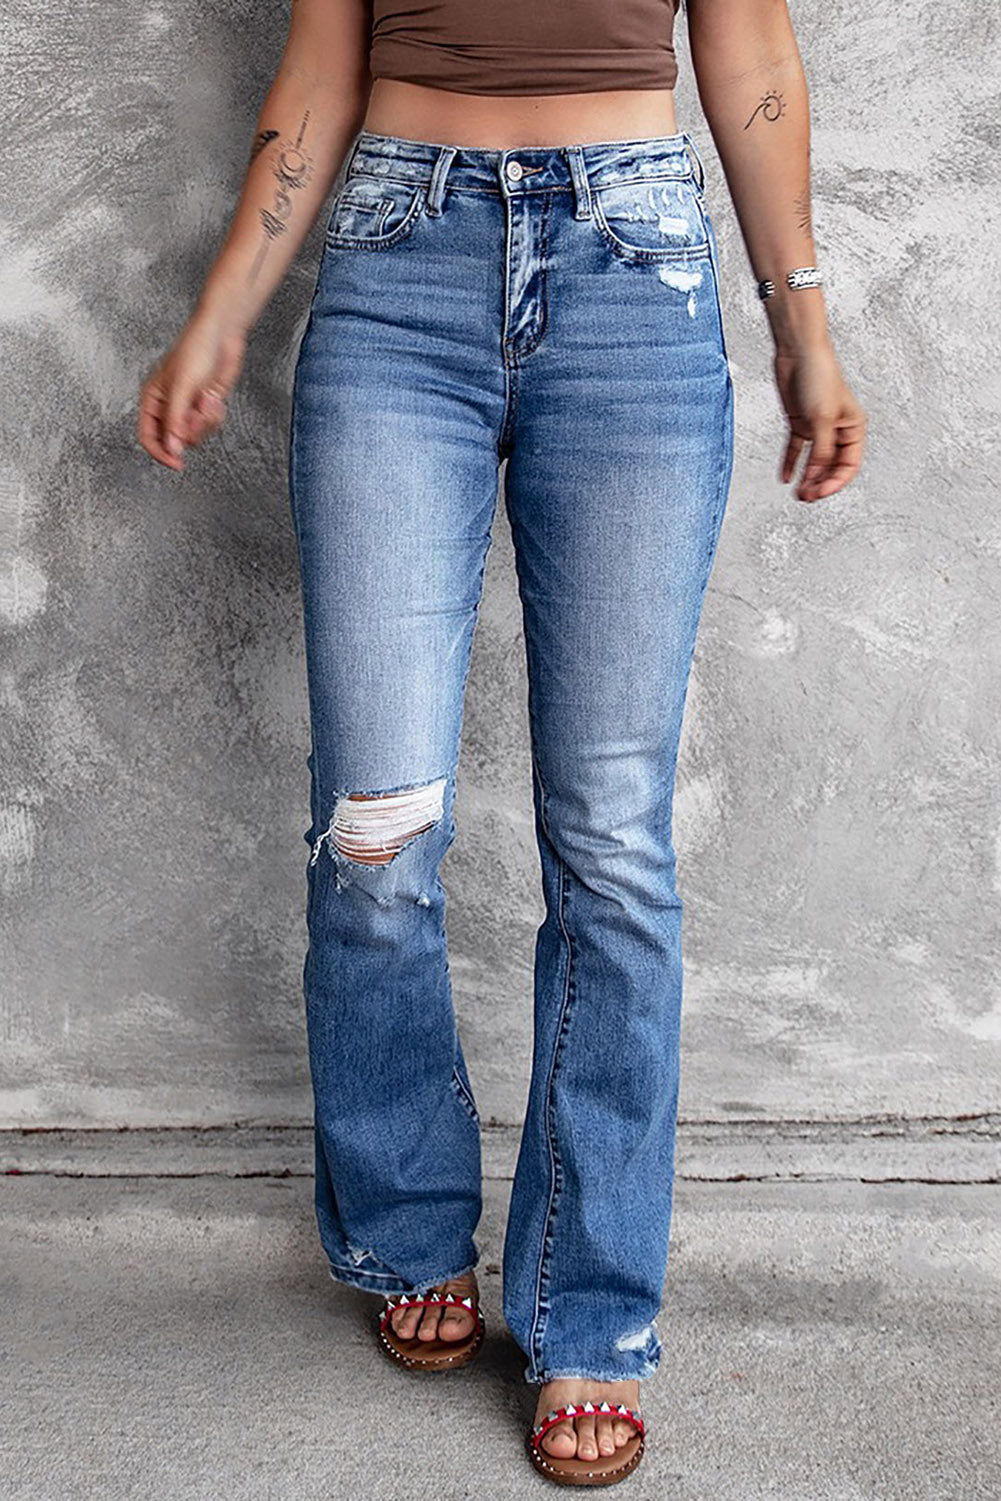 Distressed Flared Jeans